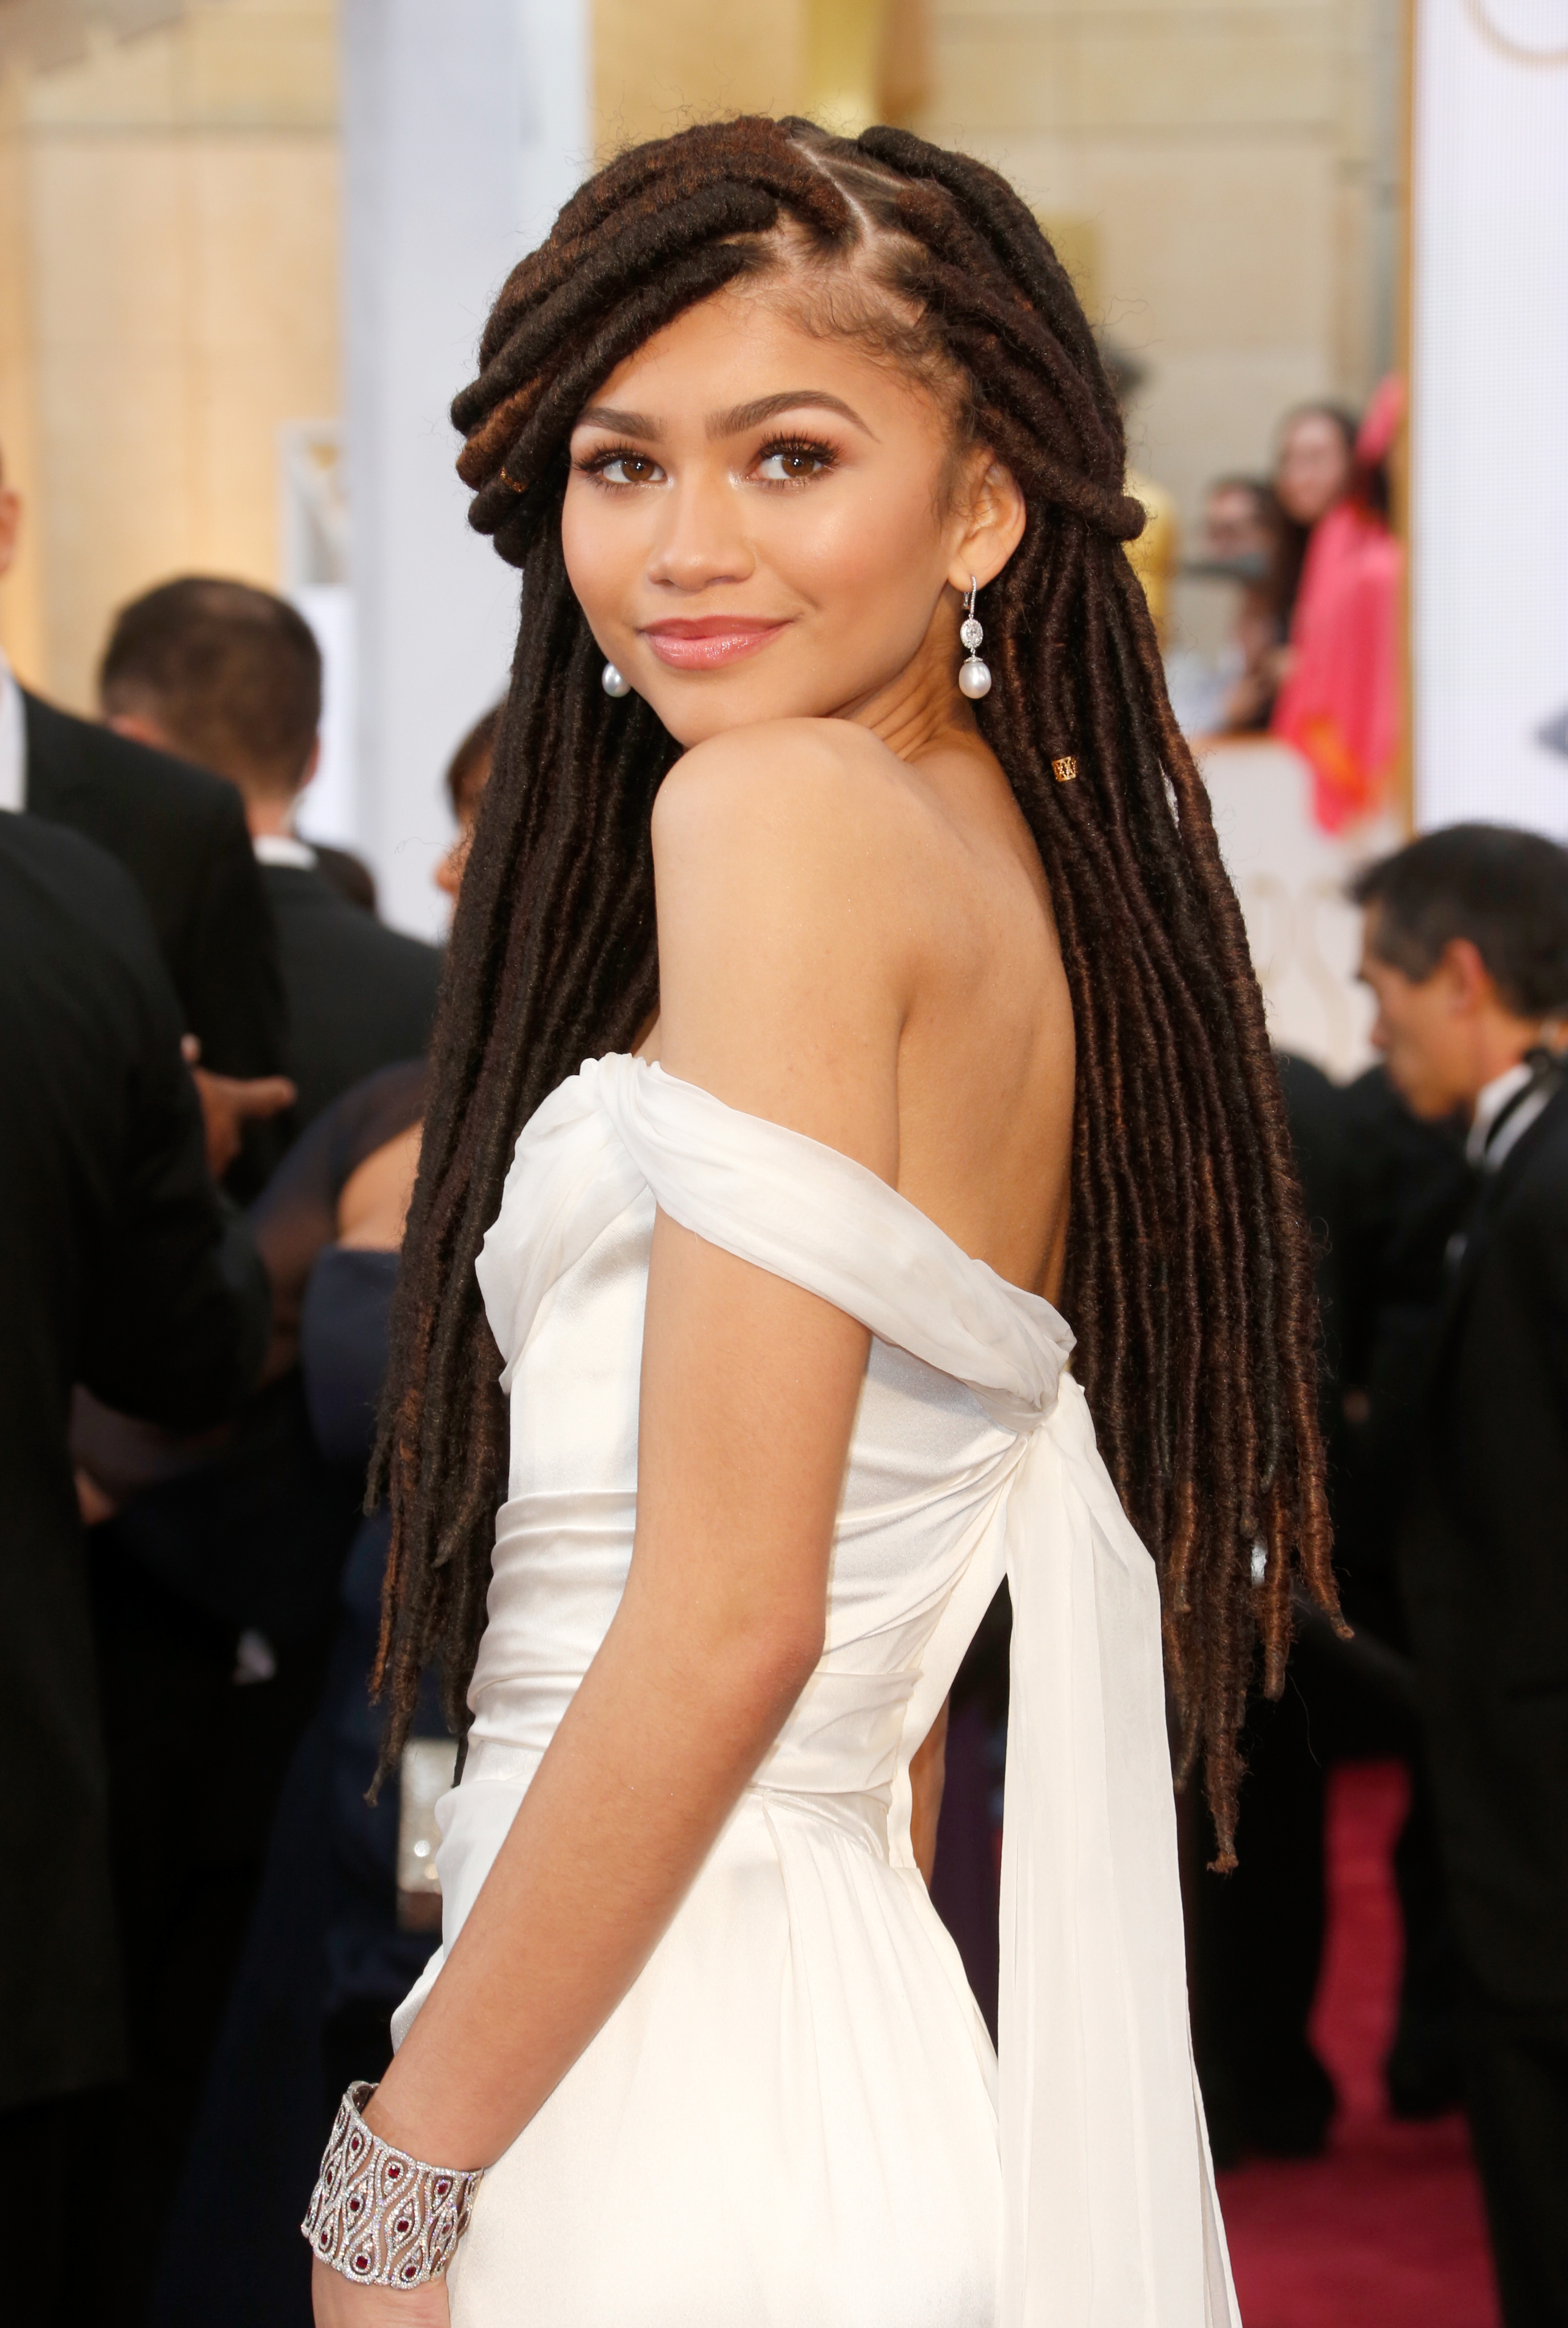 Zendaya at the 87th Annual Academy Awards at Hollywood & Highland Center on February 22, 2015 in Hollywood, California. | Source: Getty Images